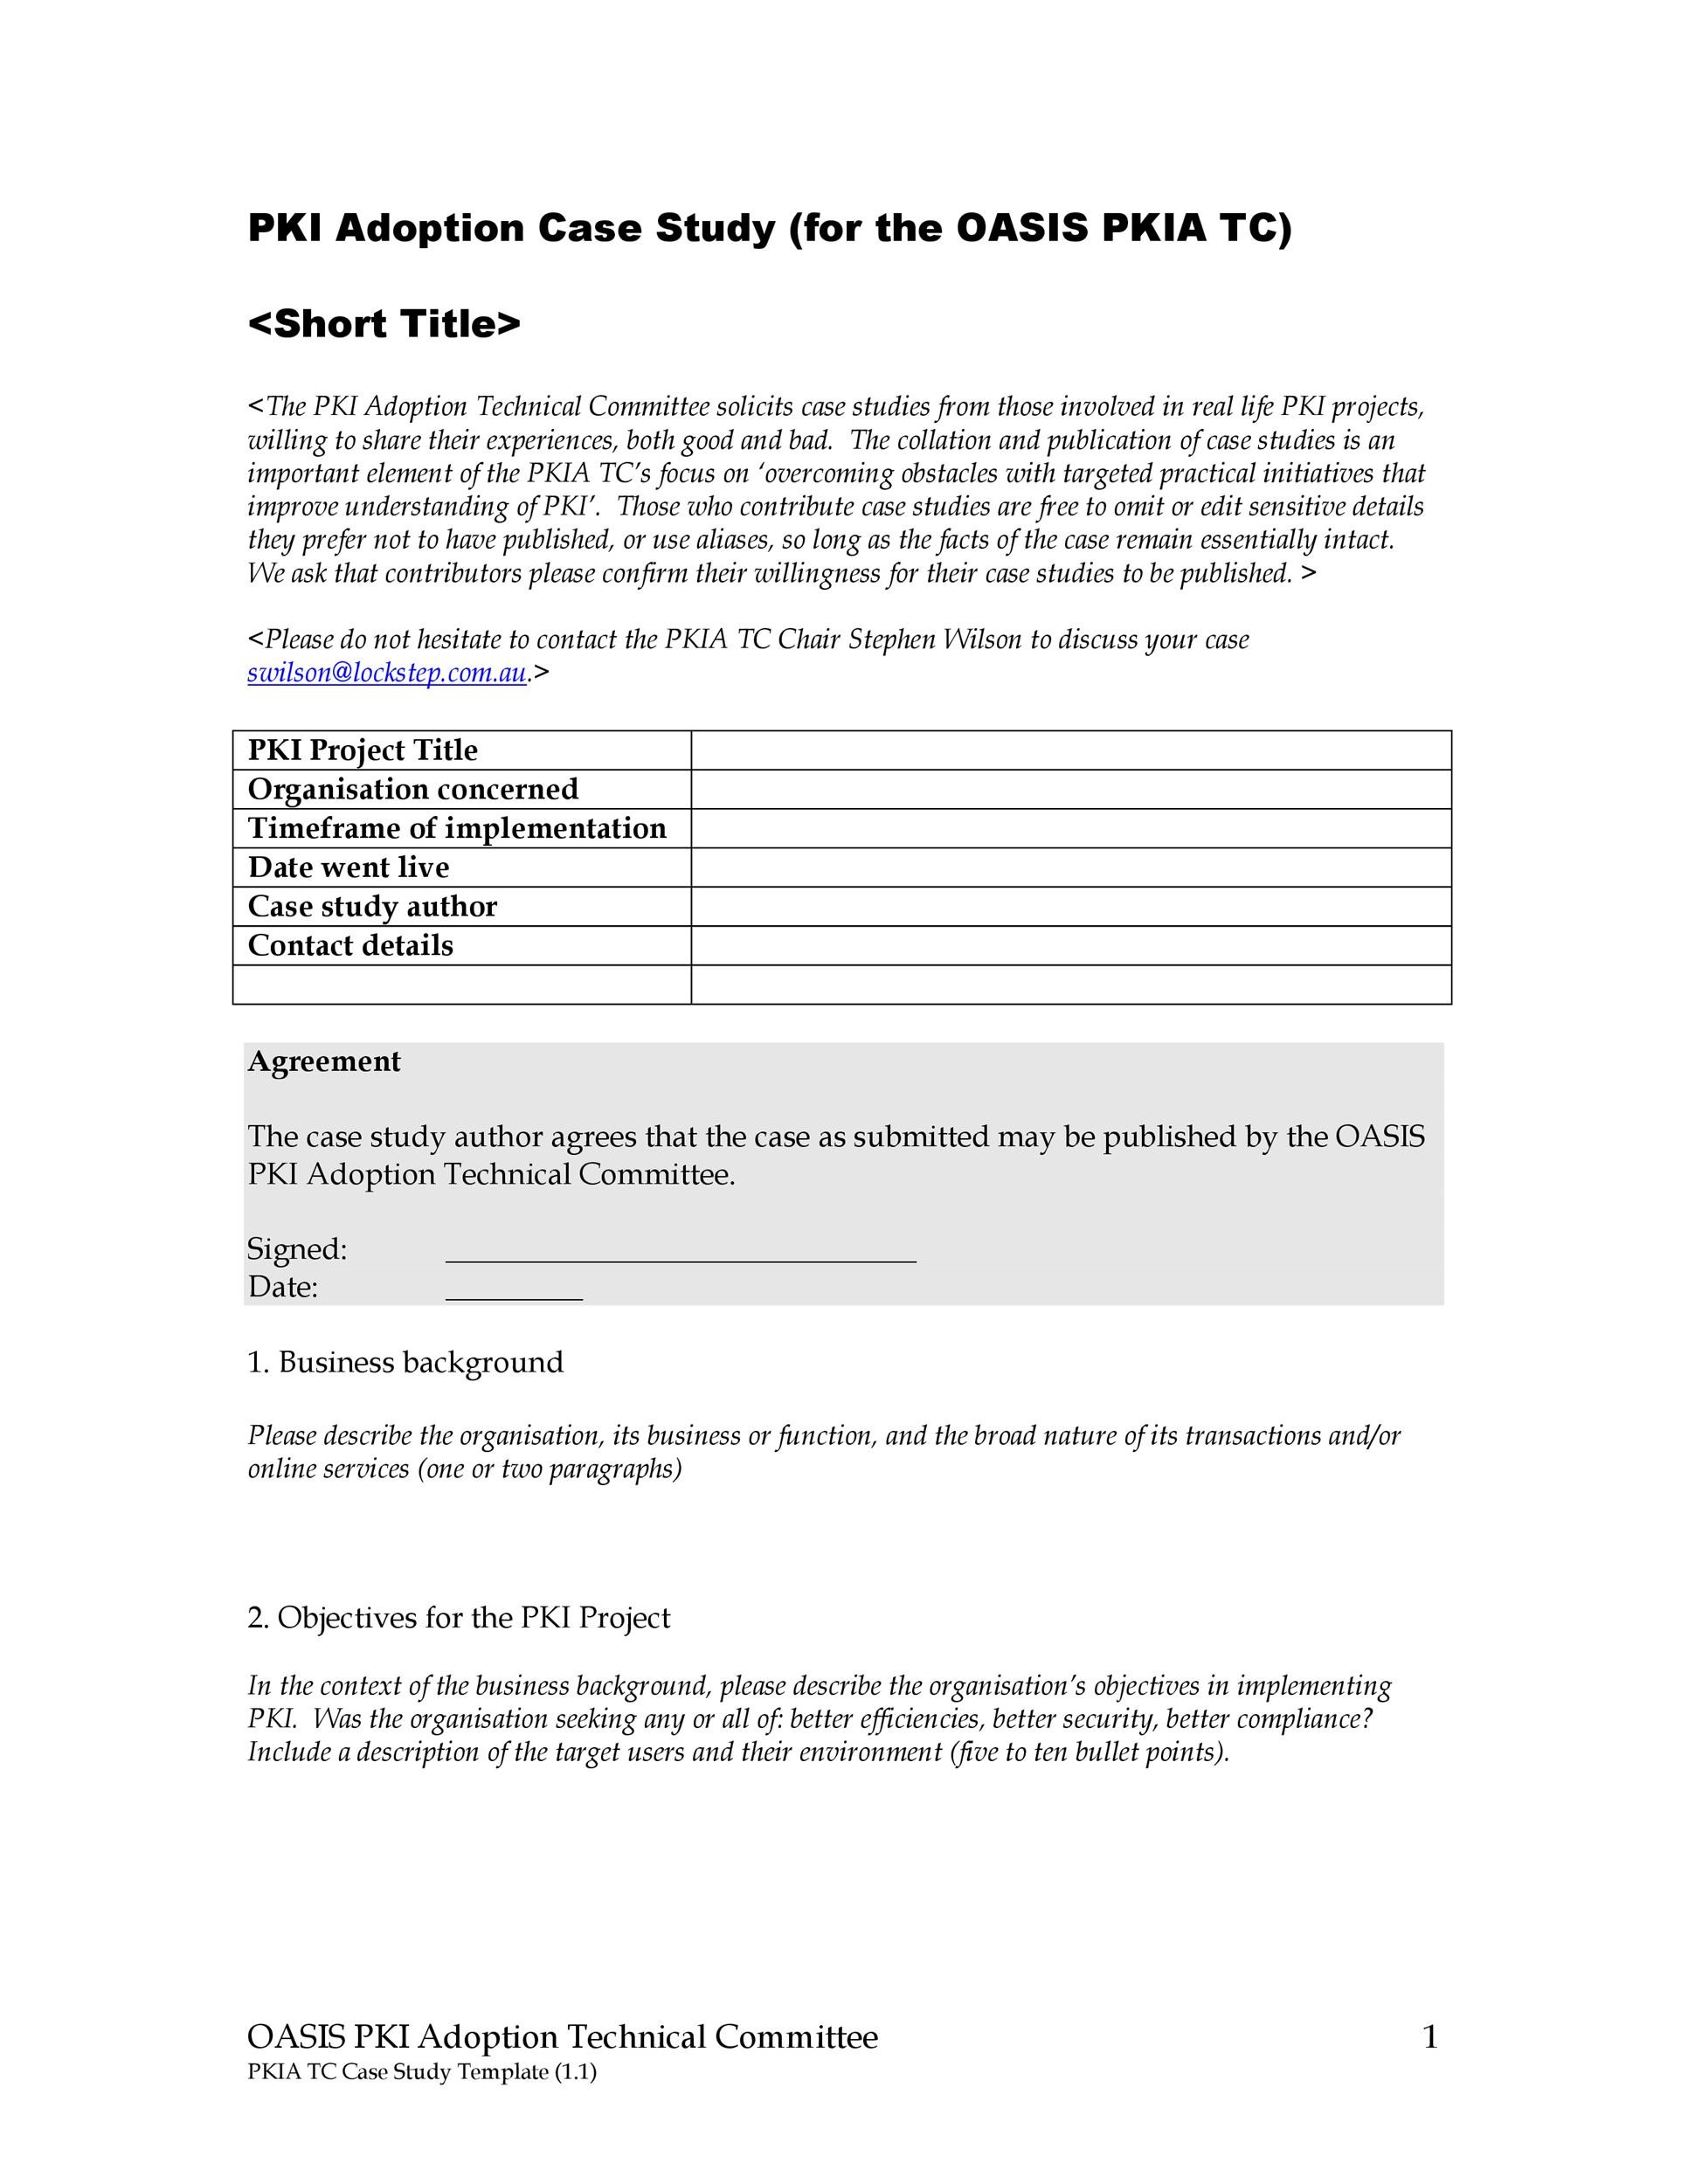 research case study template